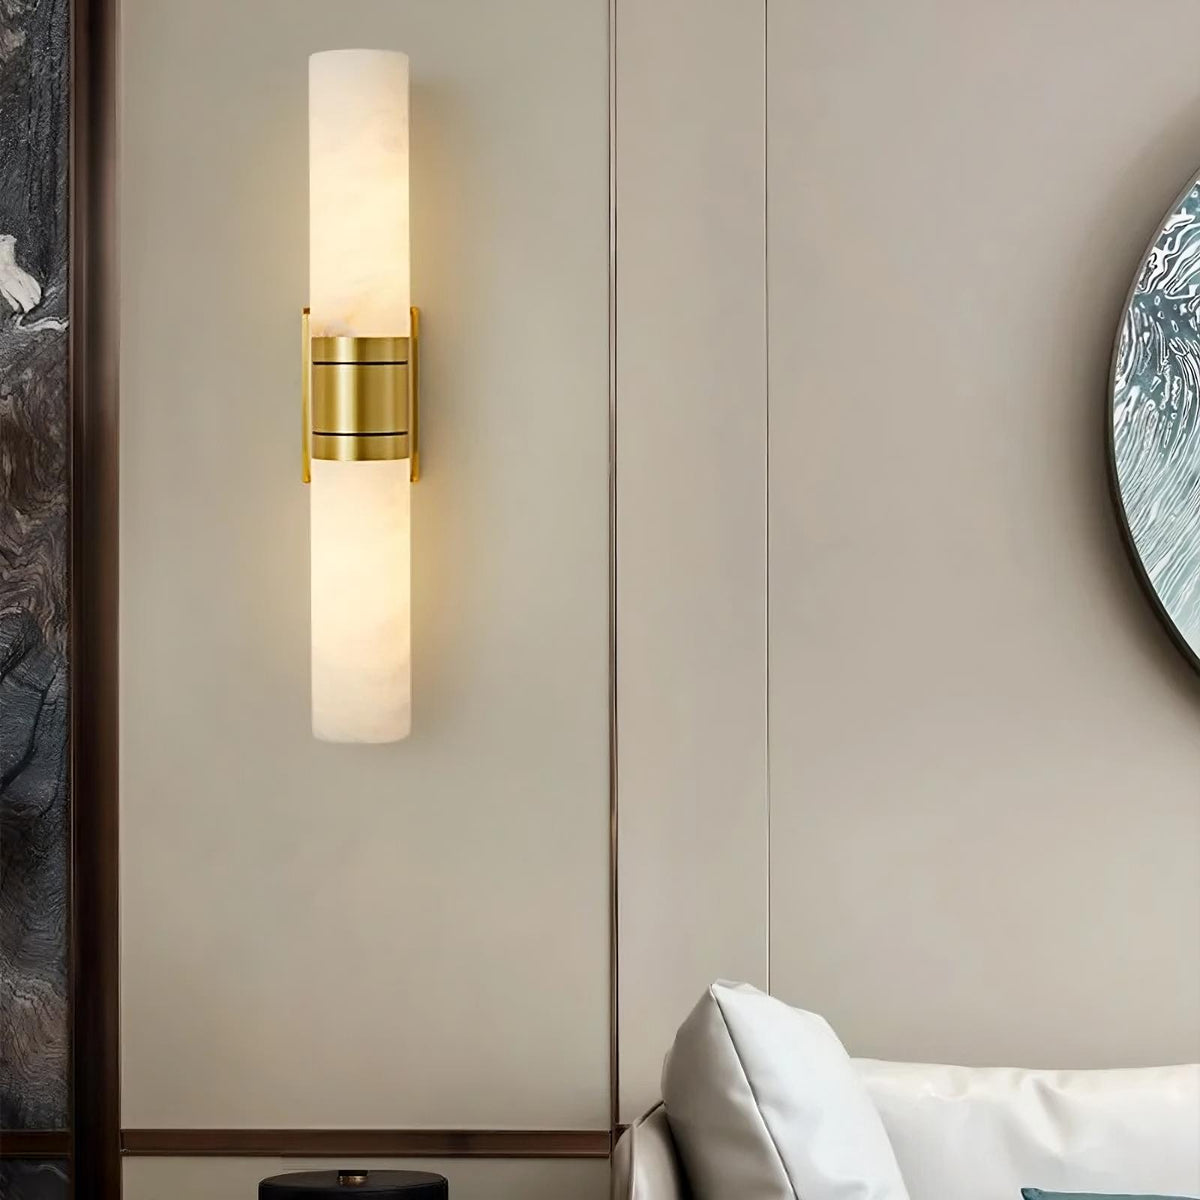 A sleek modern wall sconce with a cylindrical white diffuser and brass accents is mounted on a beige wall. This elegant Natural Marble Indoor Wall Sconce Light by Morsale.com is positioned next to a white sofa with a cushion. Part of a round, decorative mirror with unique texture is visible on the right.